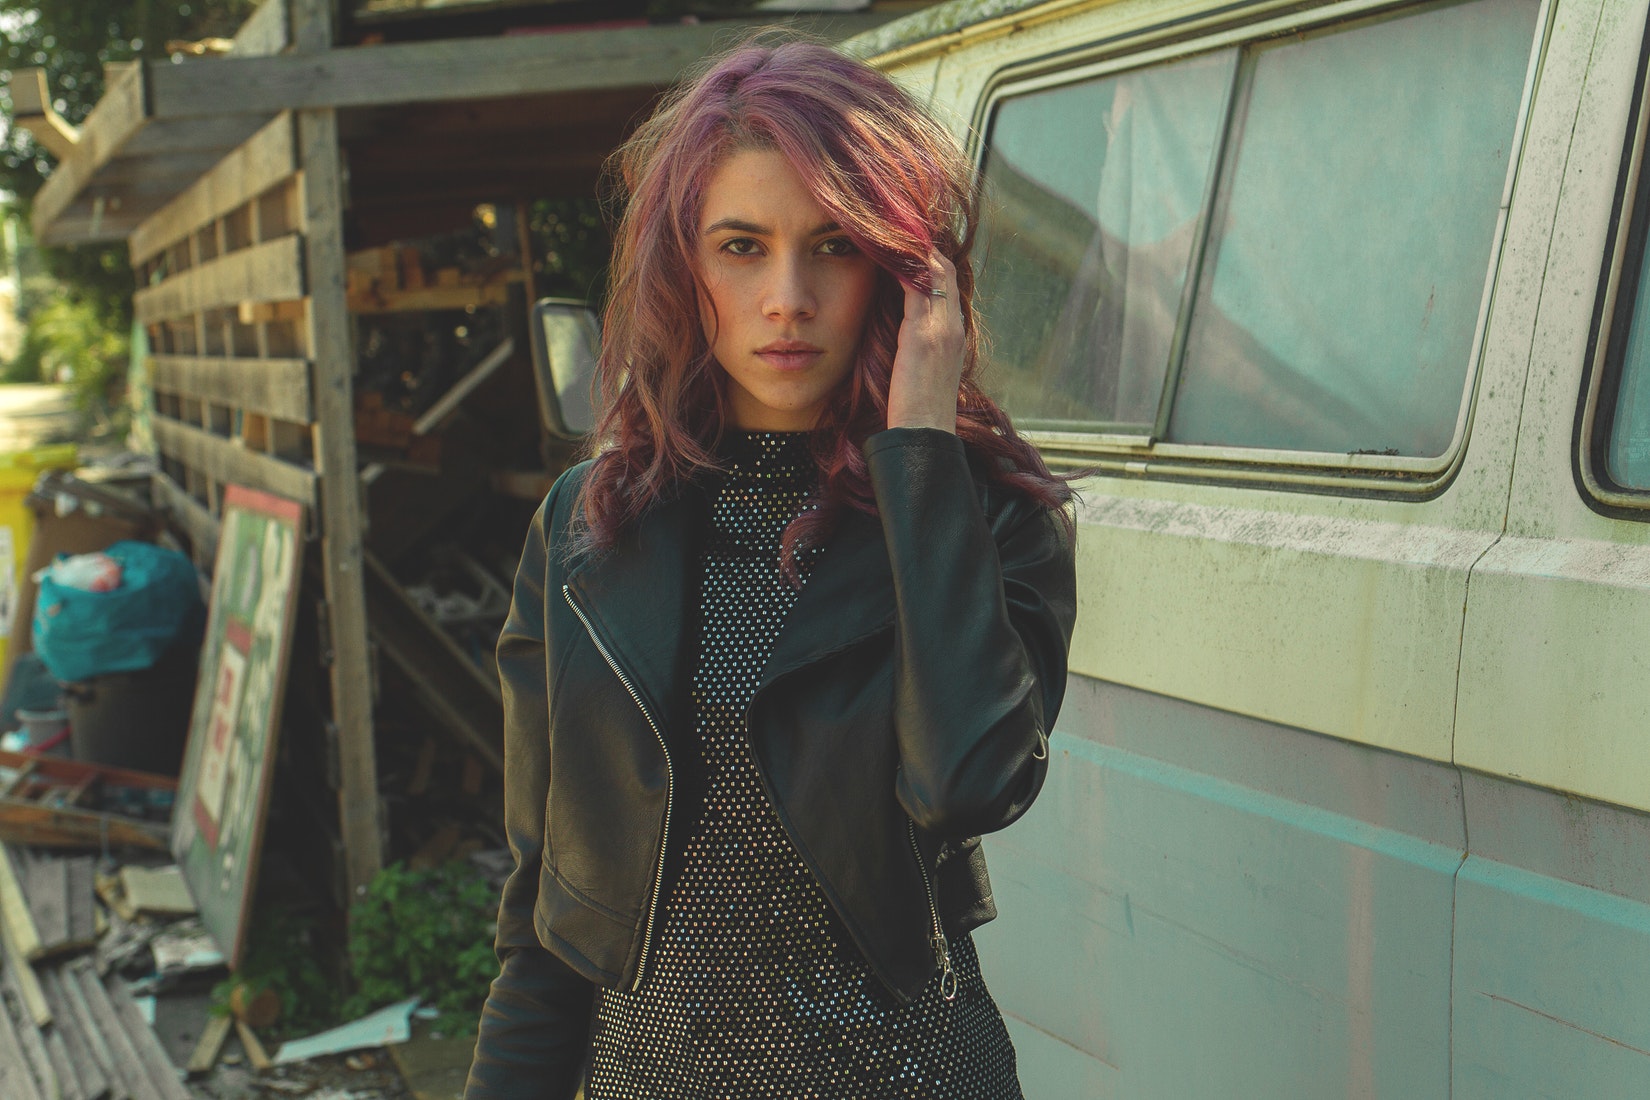 People 1650x1100 women looking at viewer hands in hair purple hair dyed hair long hair leather jacket women outdoors black clothing